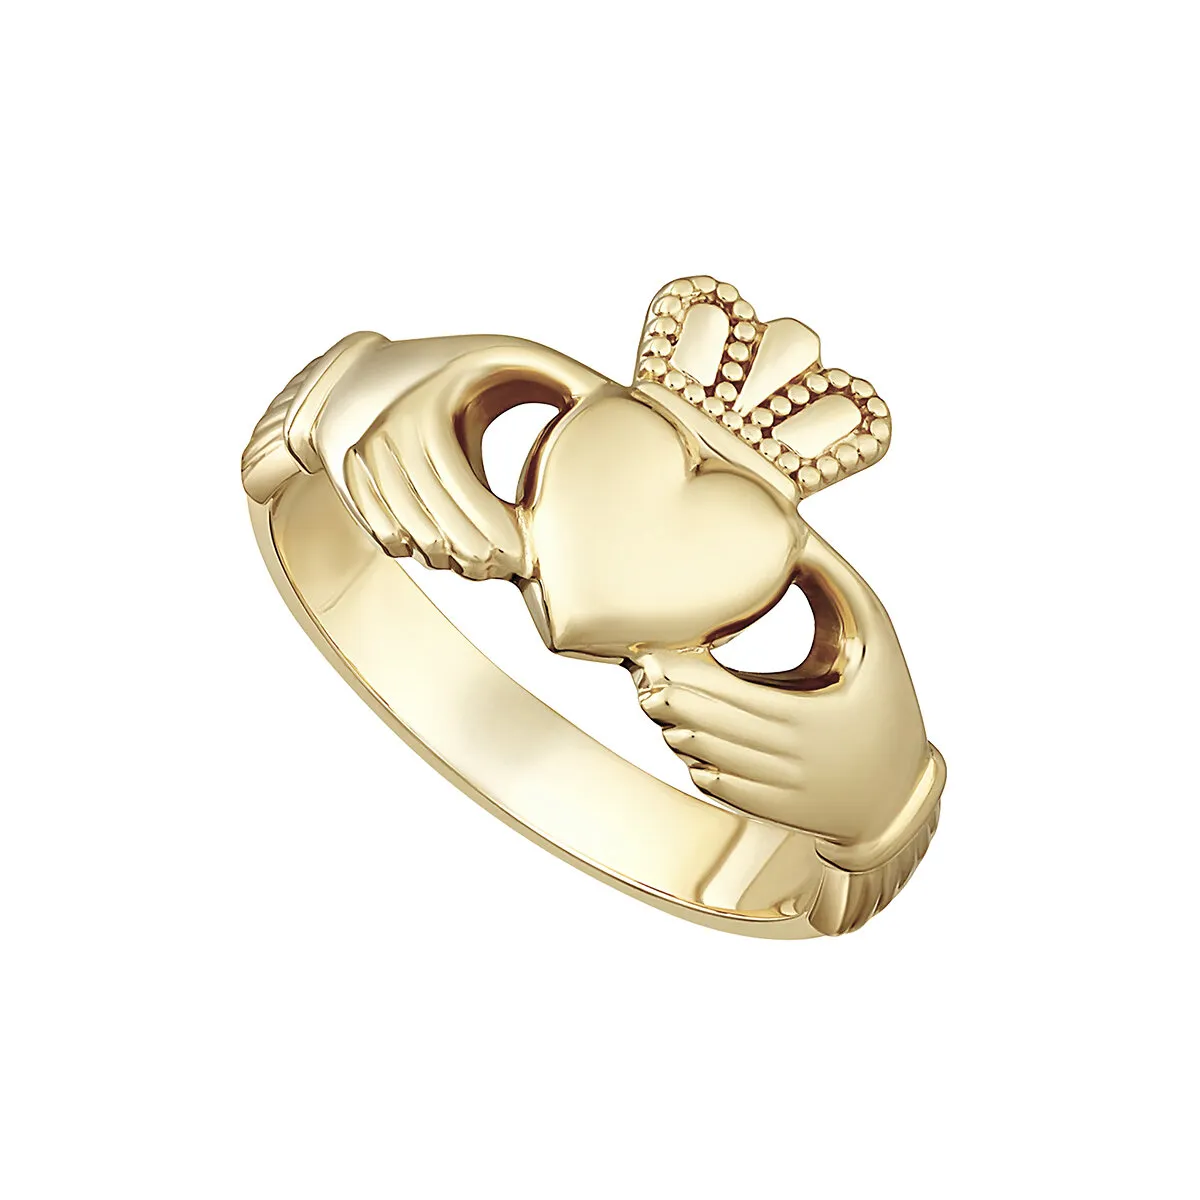 14k Gold Heavy Maids Claddagh Ring...